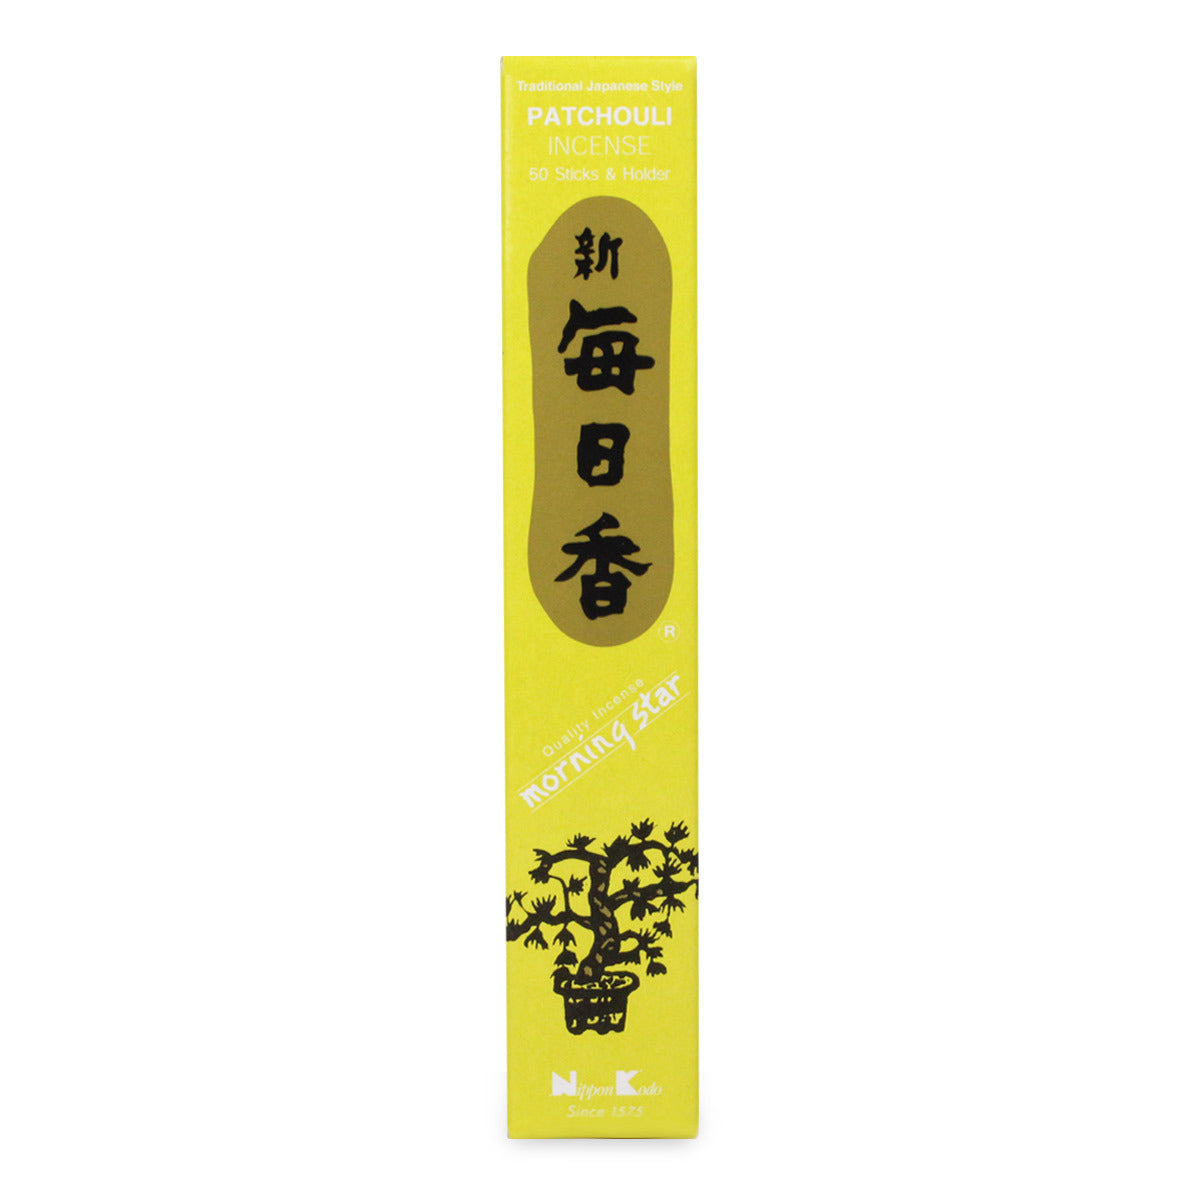 Primary image of Patchouli Incense